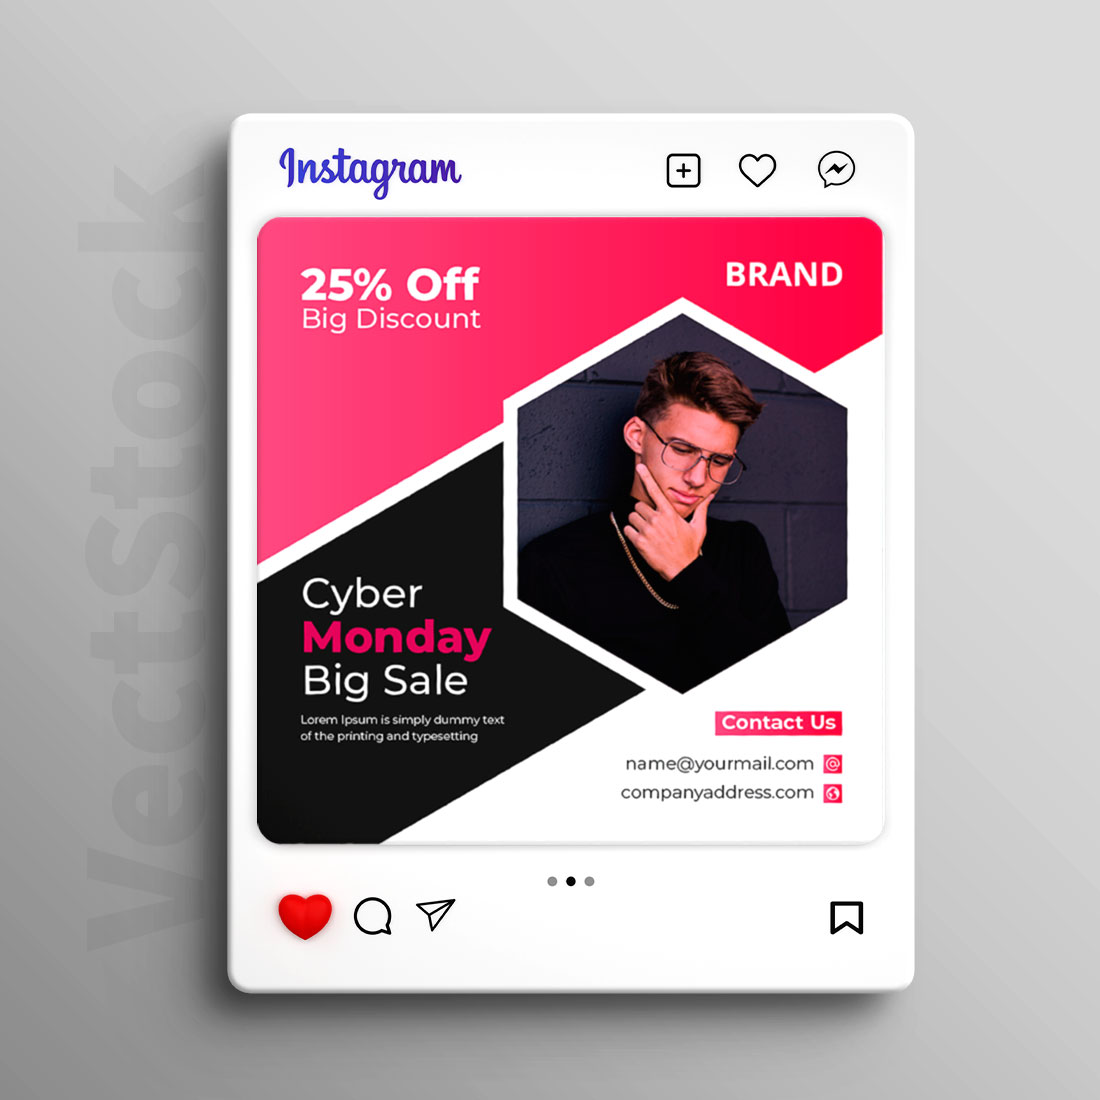 Cyber Monday big sale social media Instagram post and banner template design cover image.